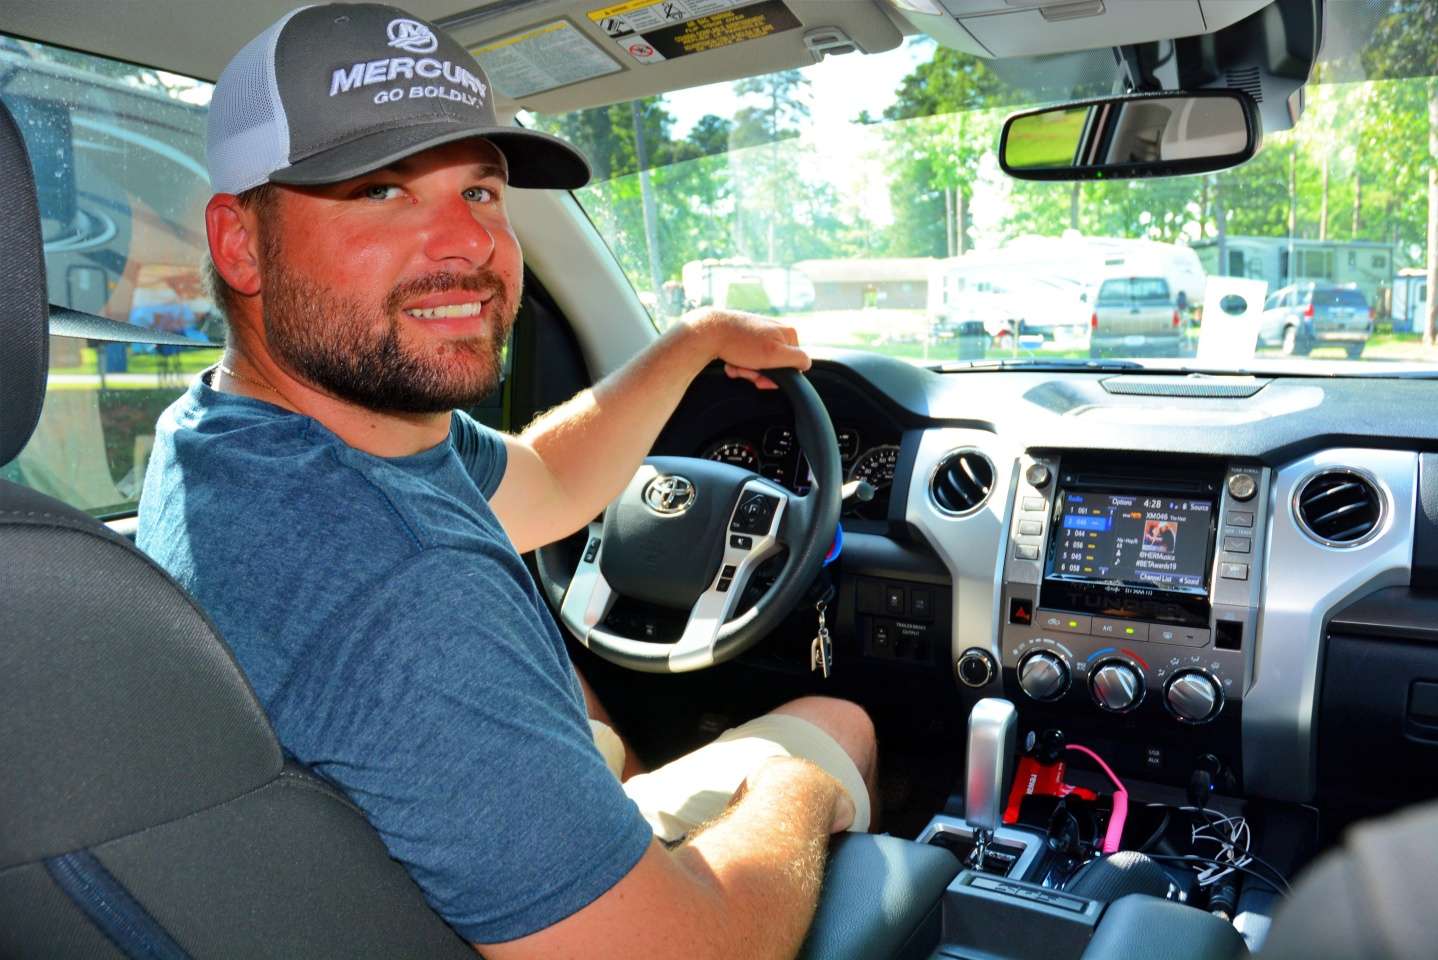 B.A.S.S. Elite Series pro Brock Mosley prefers the technology found in Toyotaâs. He uses the safe in the console to store personal items. He also likes to jam out to the XM Radio, listening to all genres of music, from country to rap. It helps keep him awake and entertained on the road.